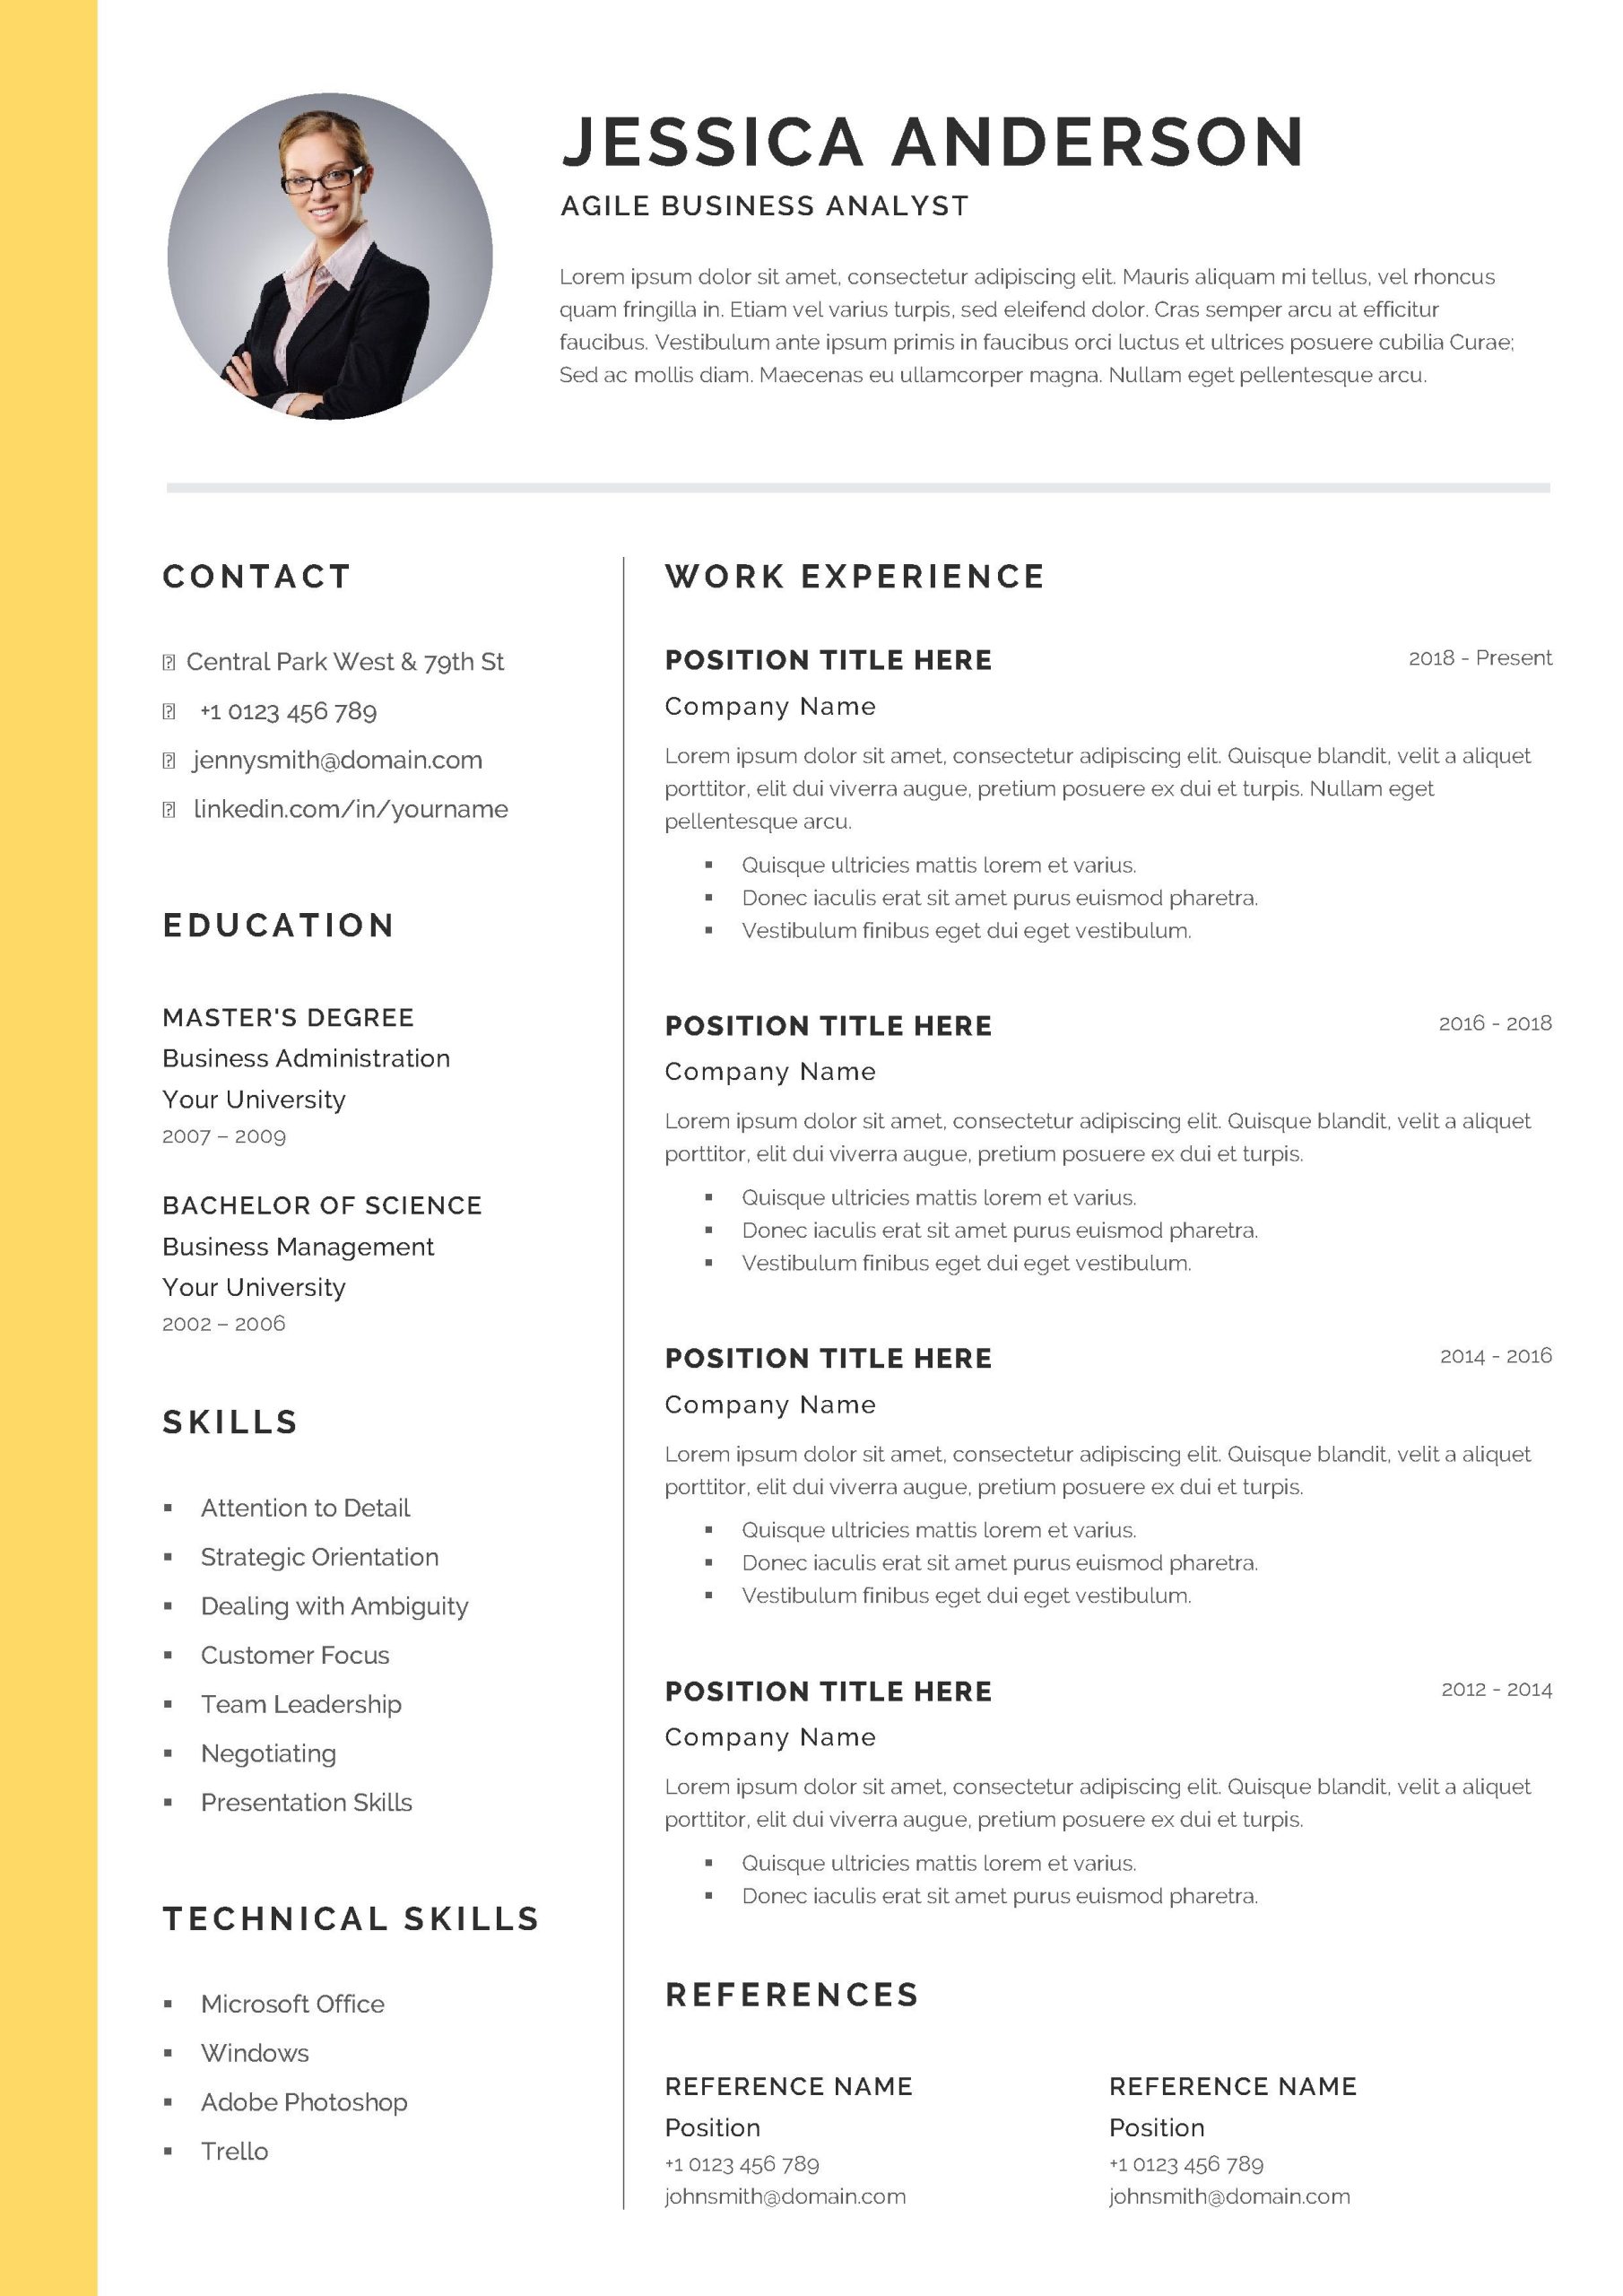 Business Analyst Resume Examples 2018